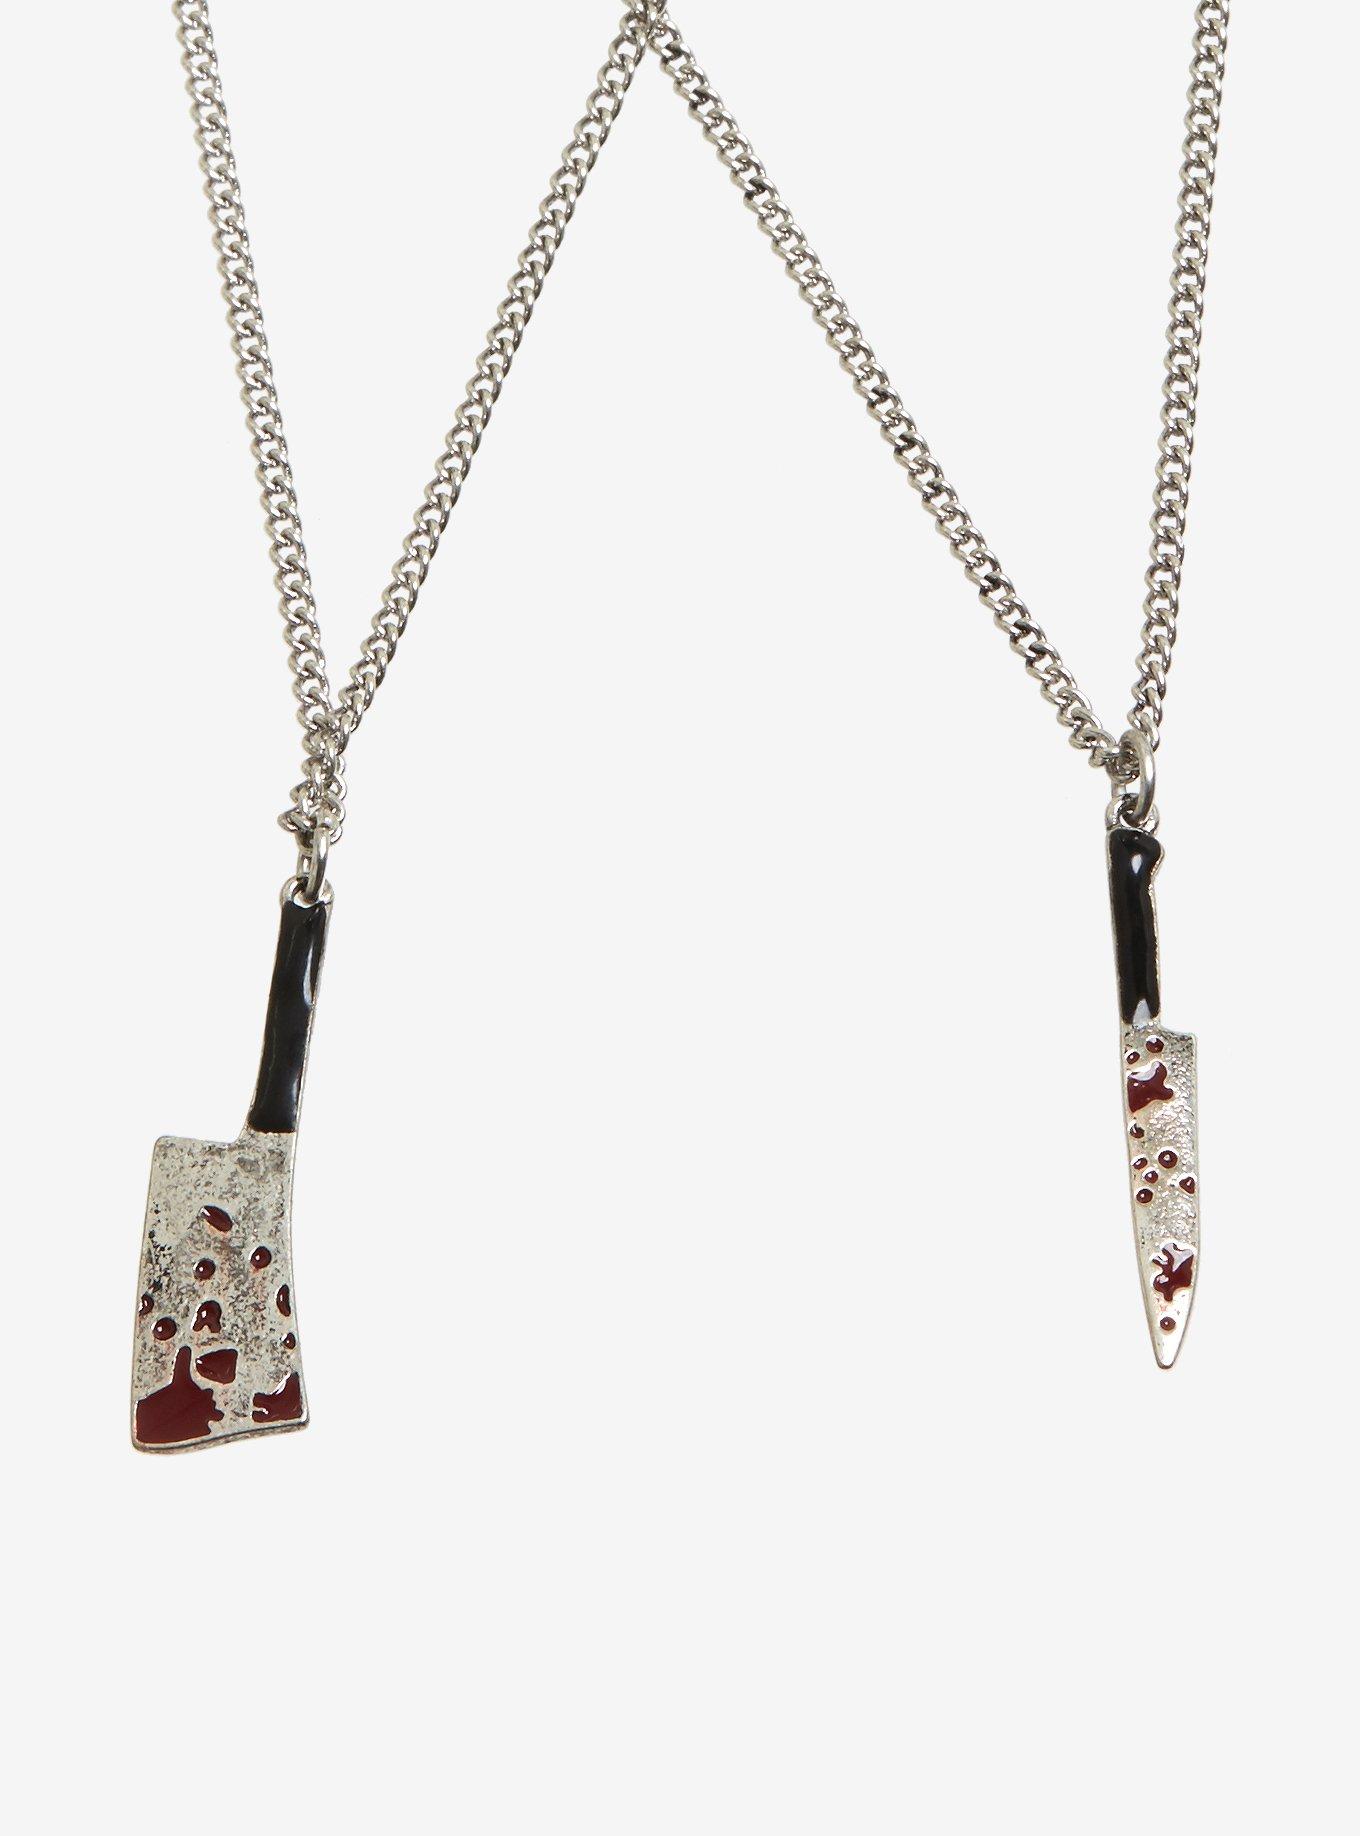 Bloody Weapons Best Friend Necklace Set